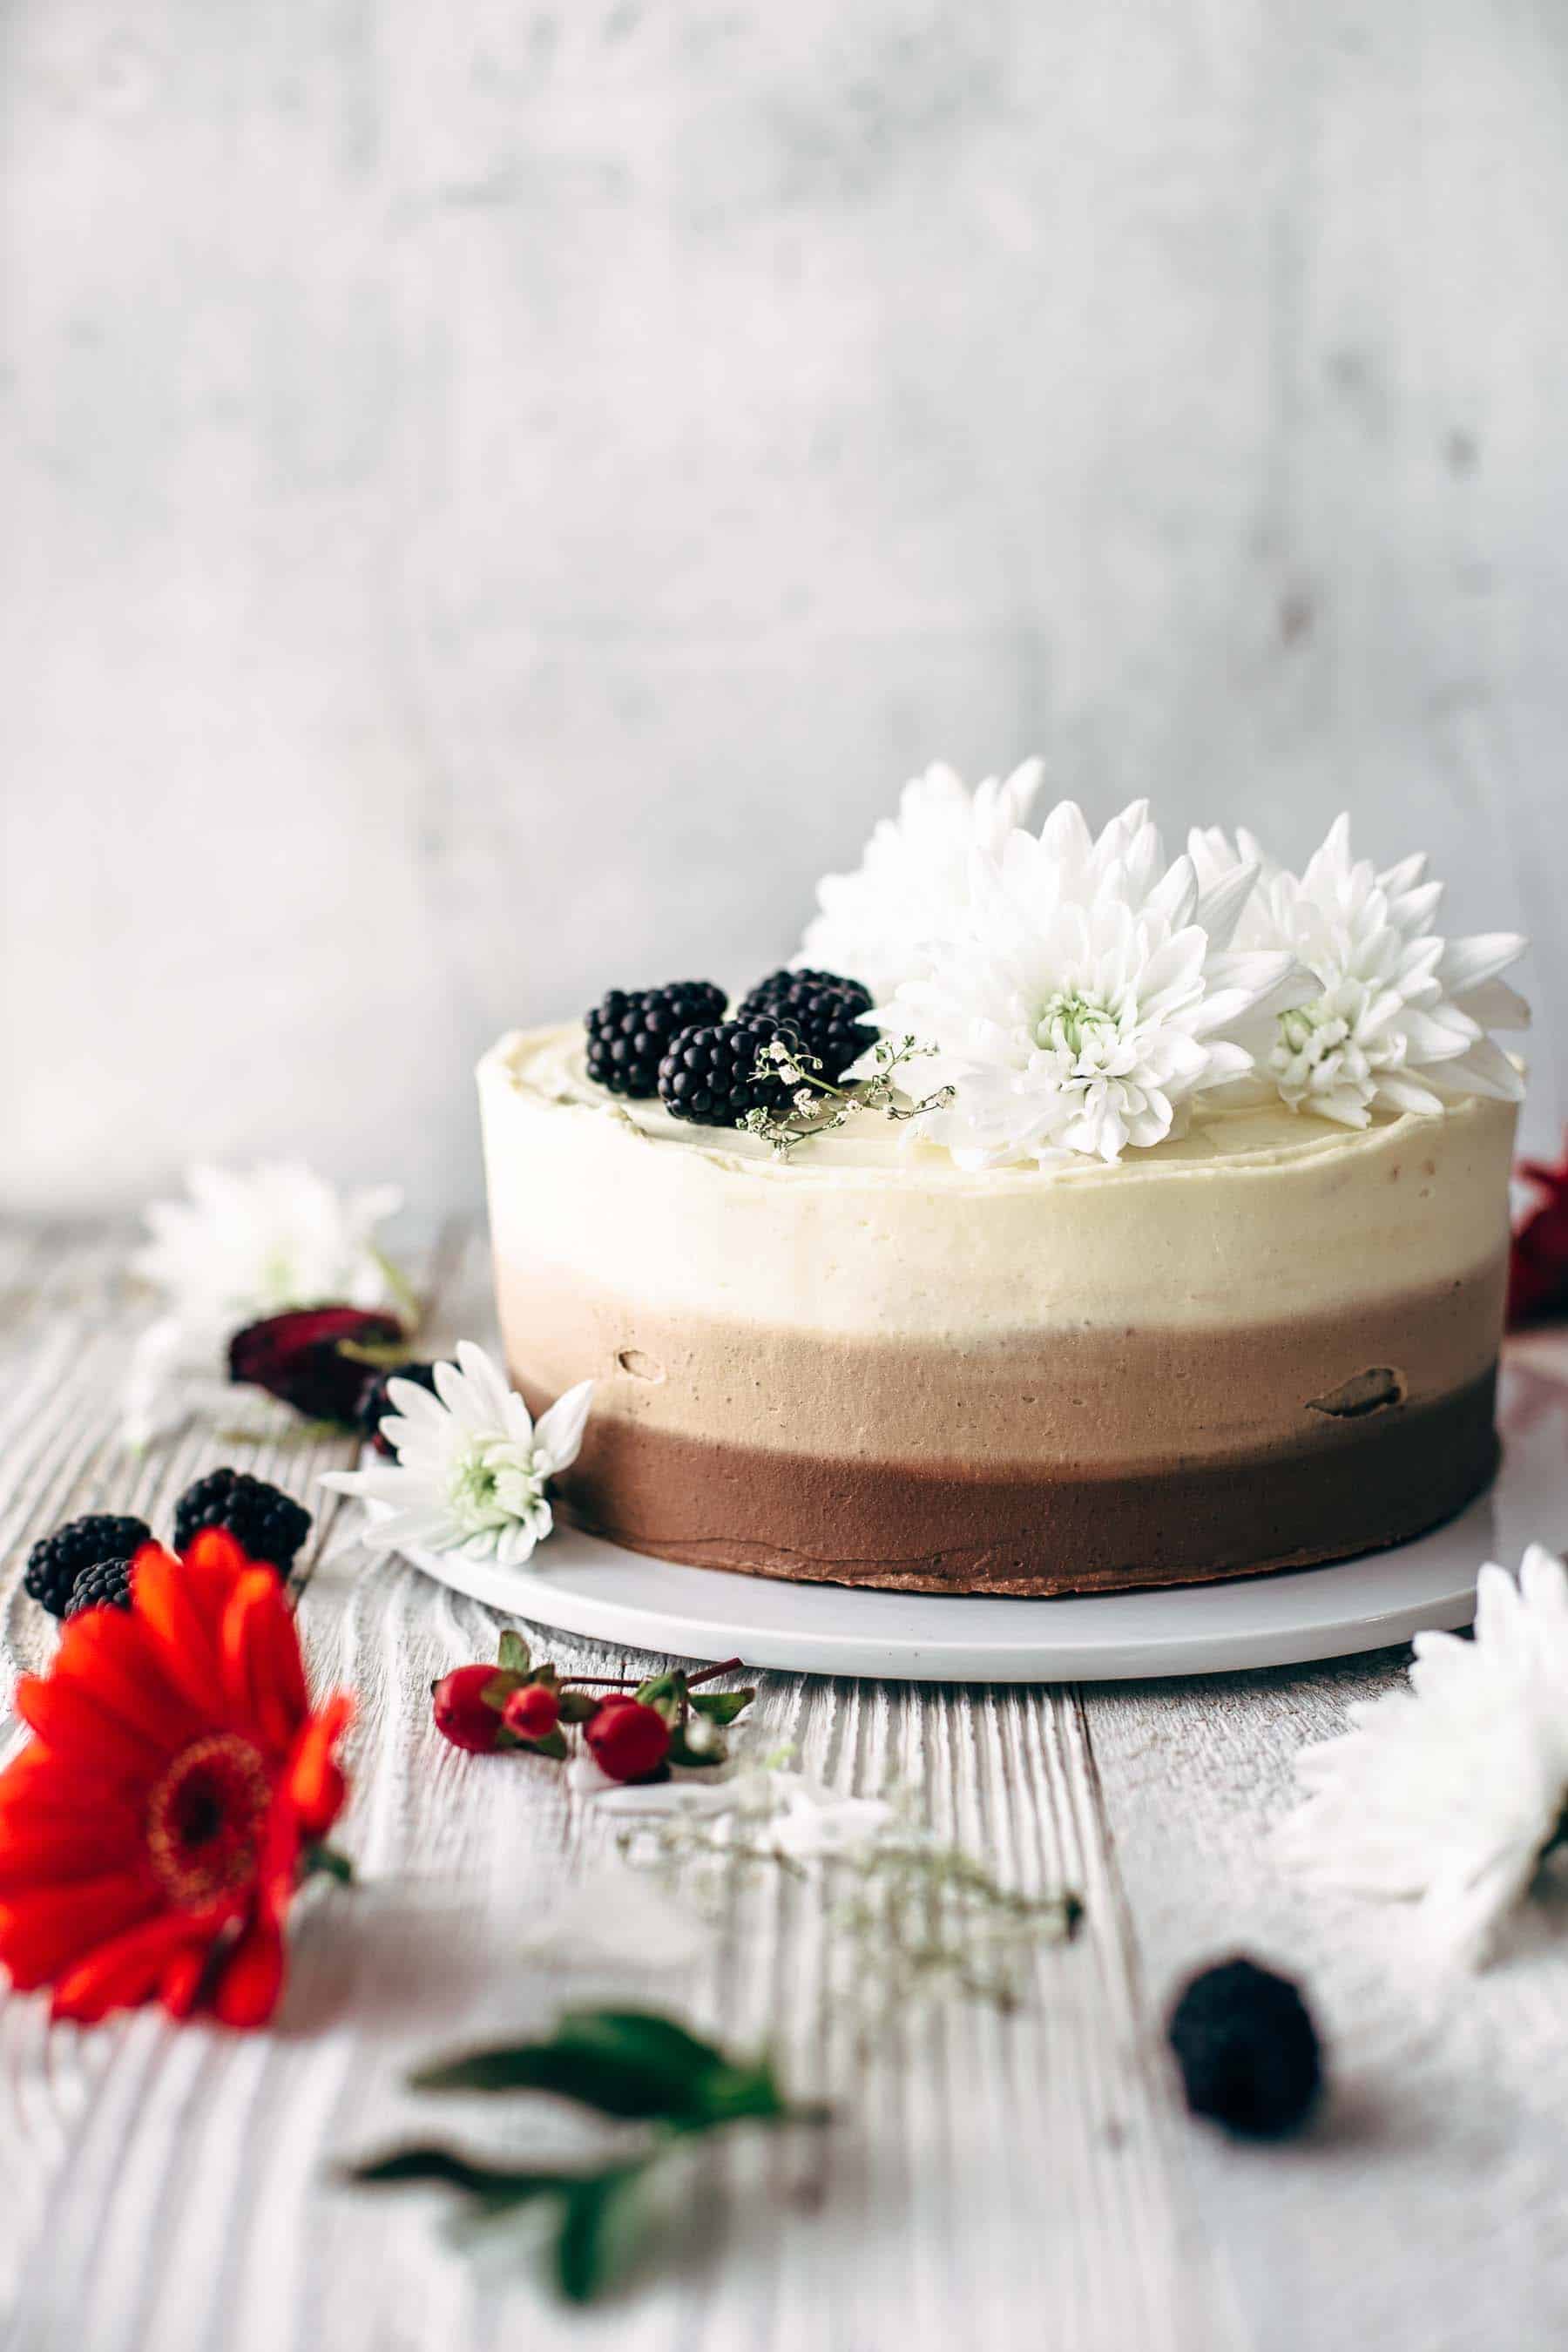 chocolate ombre cake decorated with flowers and berries on a white cake plate